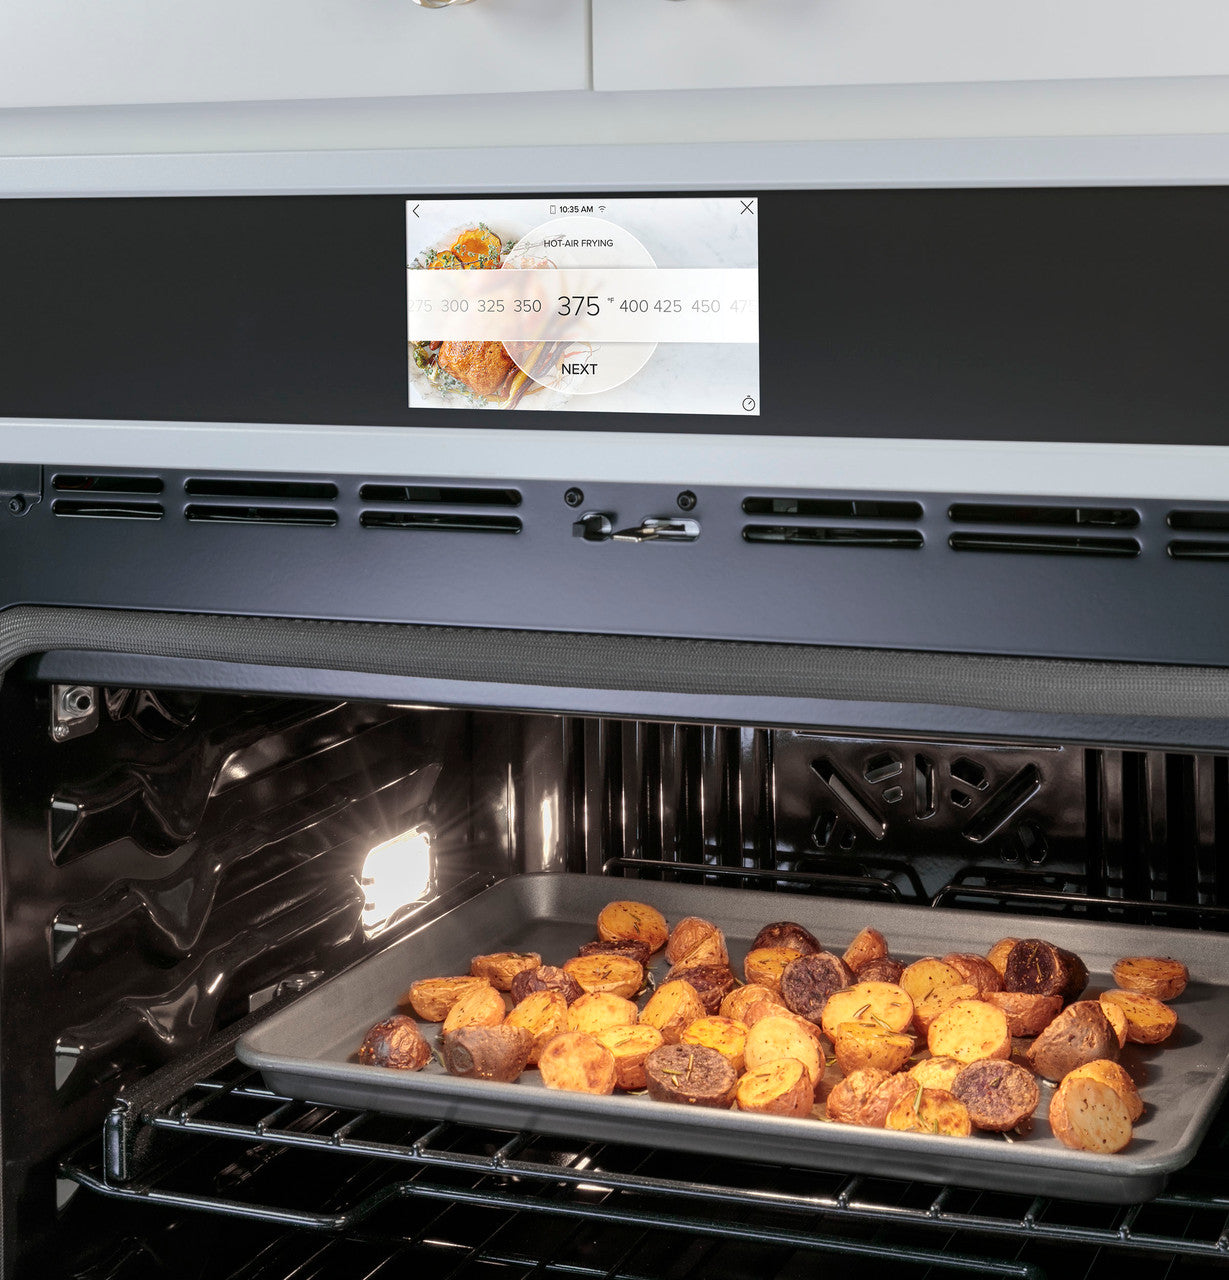 Café - 10 cu. ft Double Wall Oven in White - CTD90DP4NW2